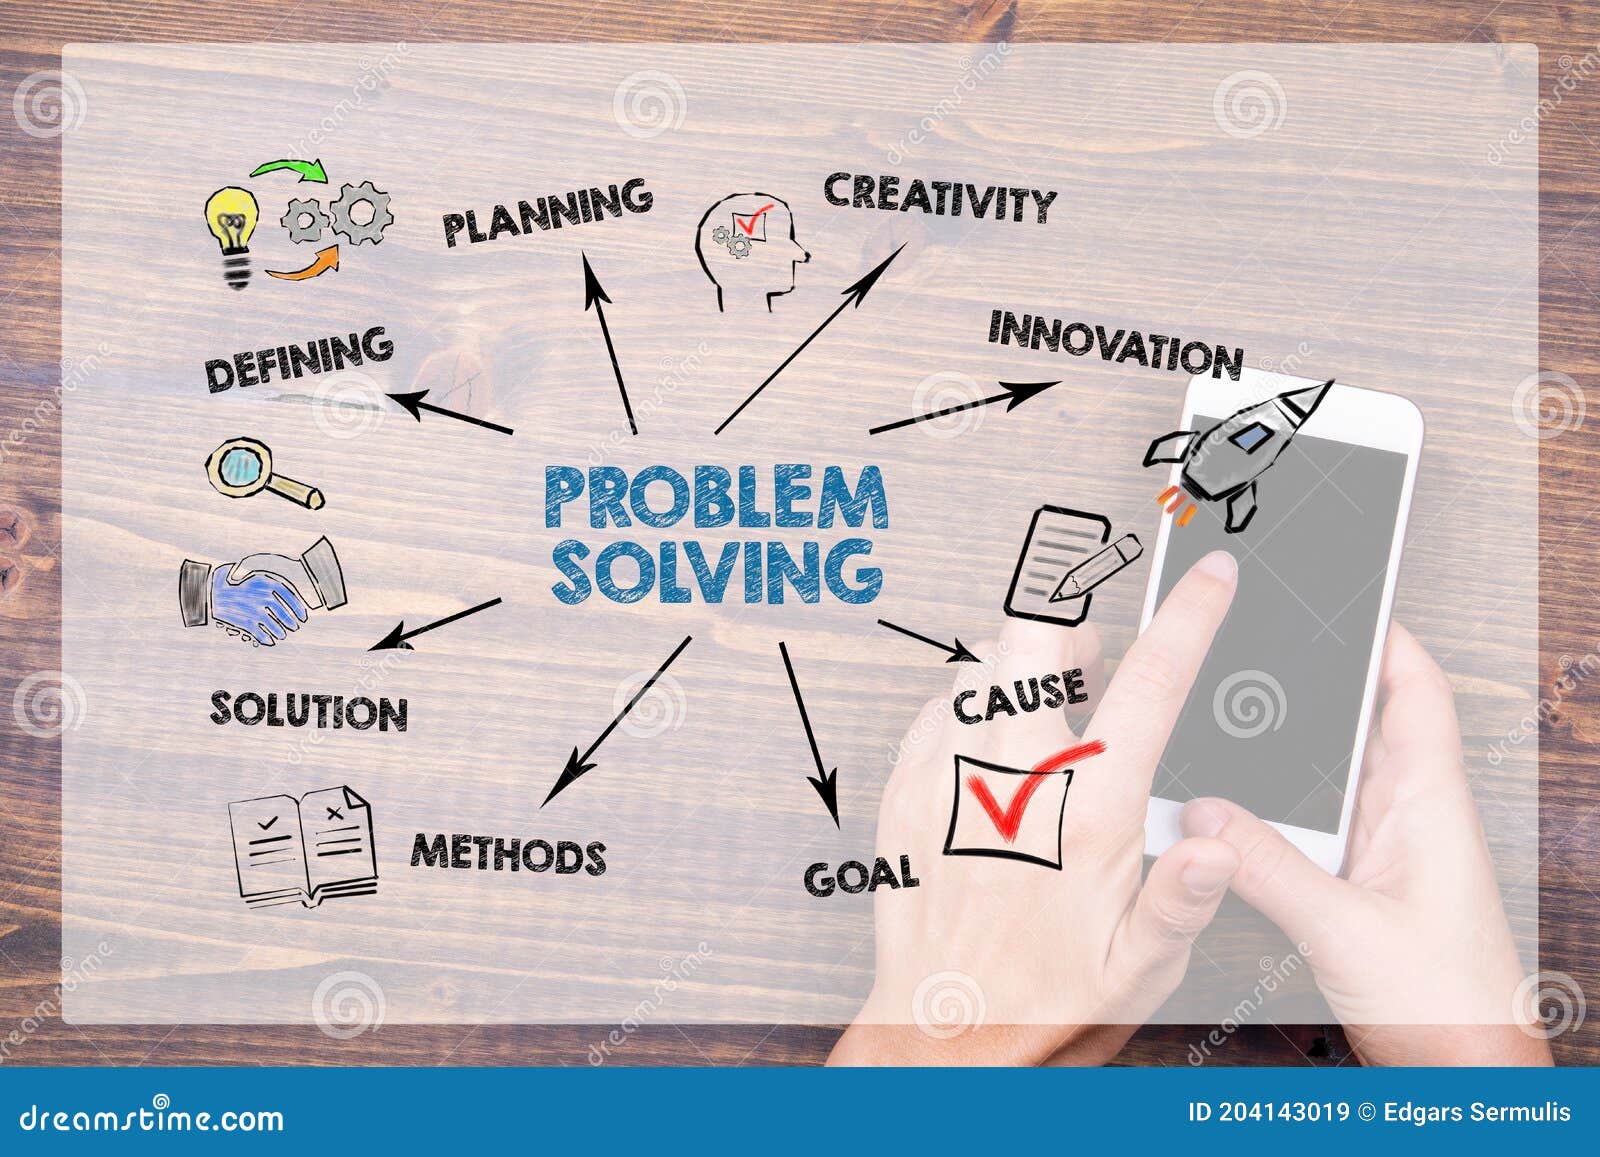 creative problem solving innovation and meaningful r & d